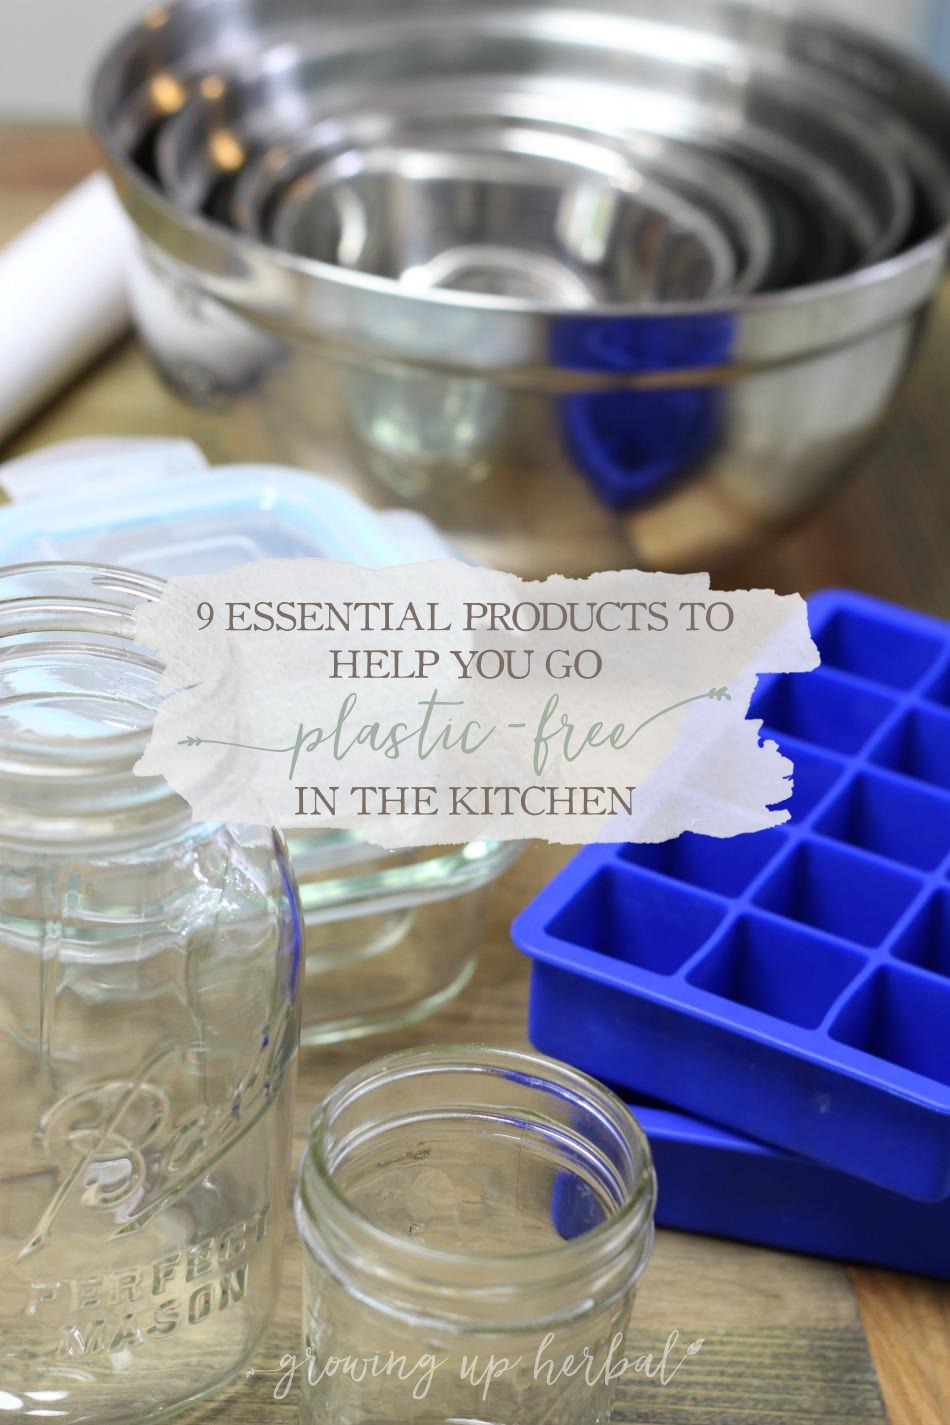 9 Essential Products To Help You Go Plastic-Free In The Kitchen | Growing Up Herbal | Here are 9 products to make going plastic-free in the kitchen a bit easier on you!